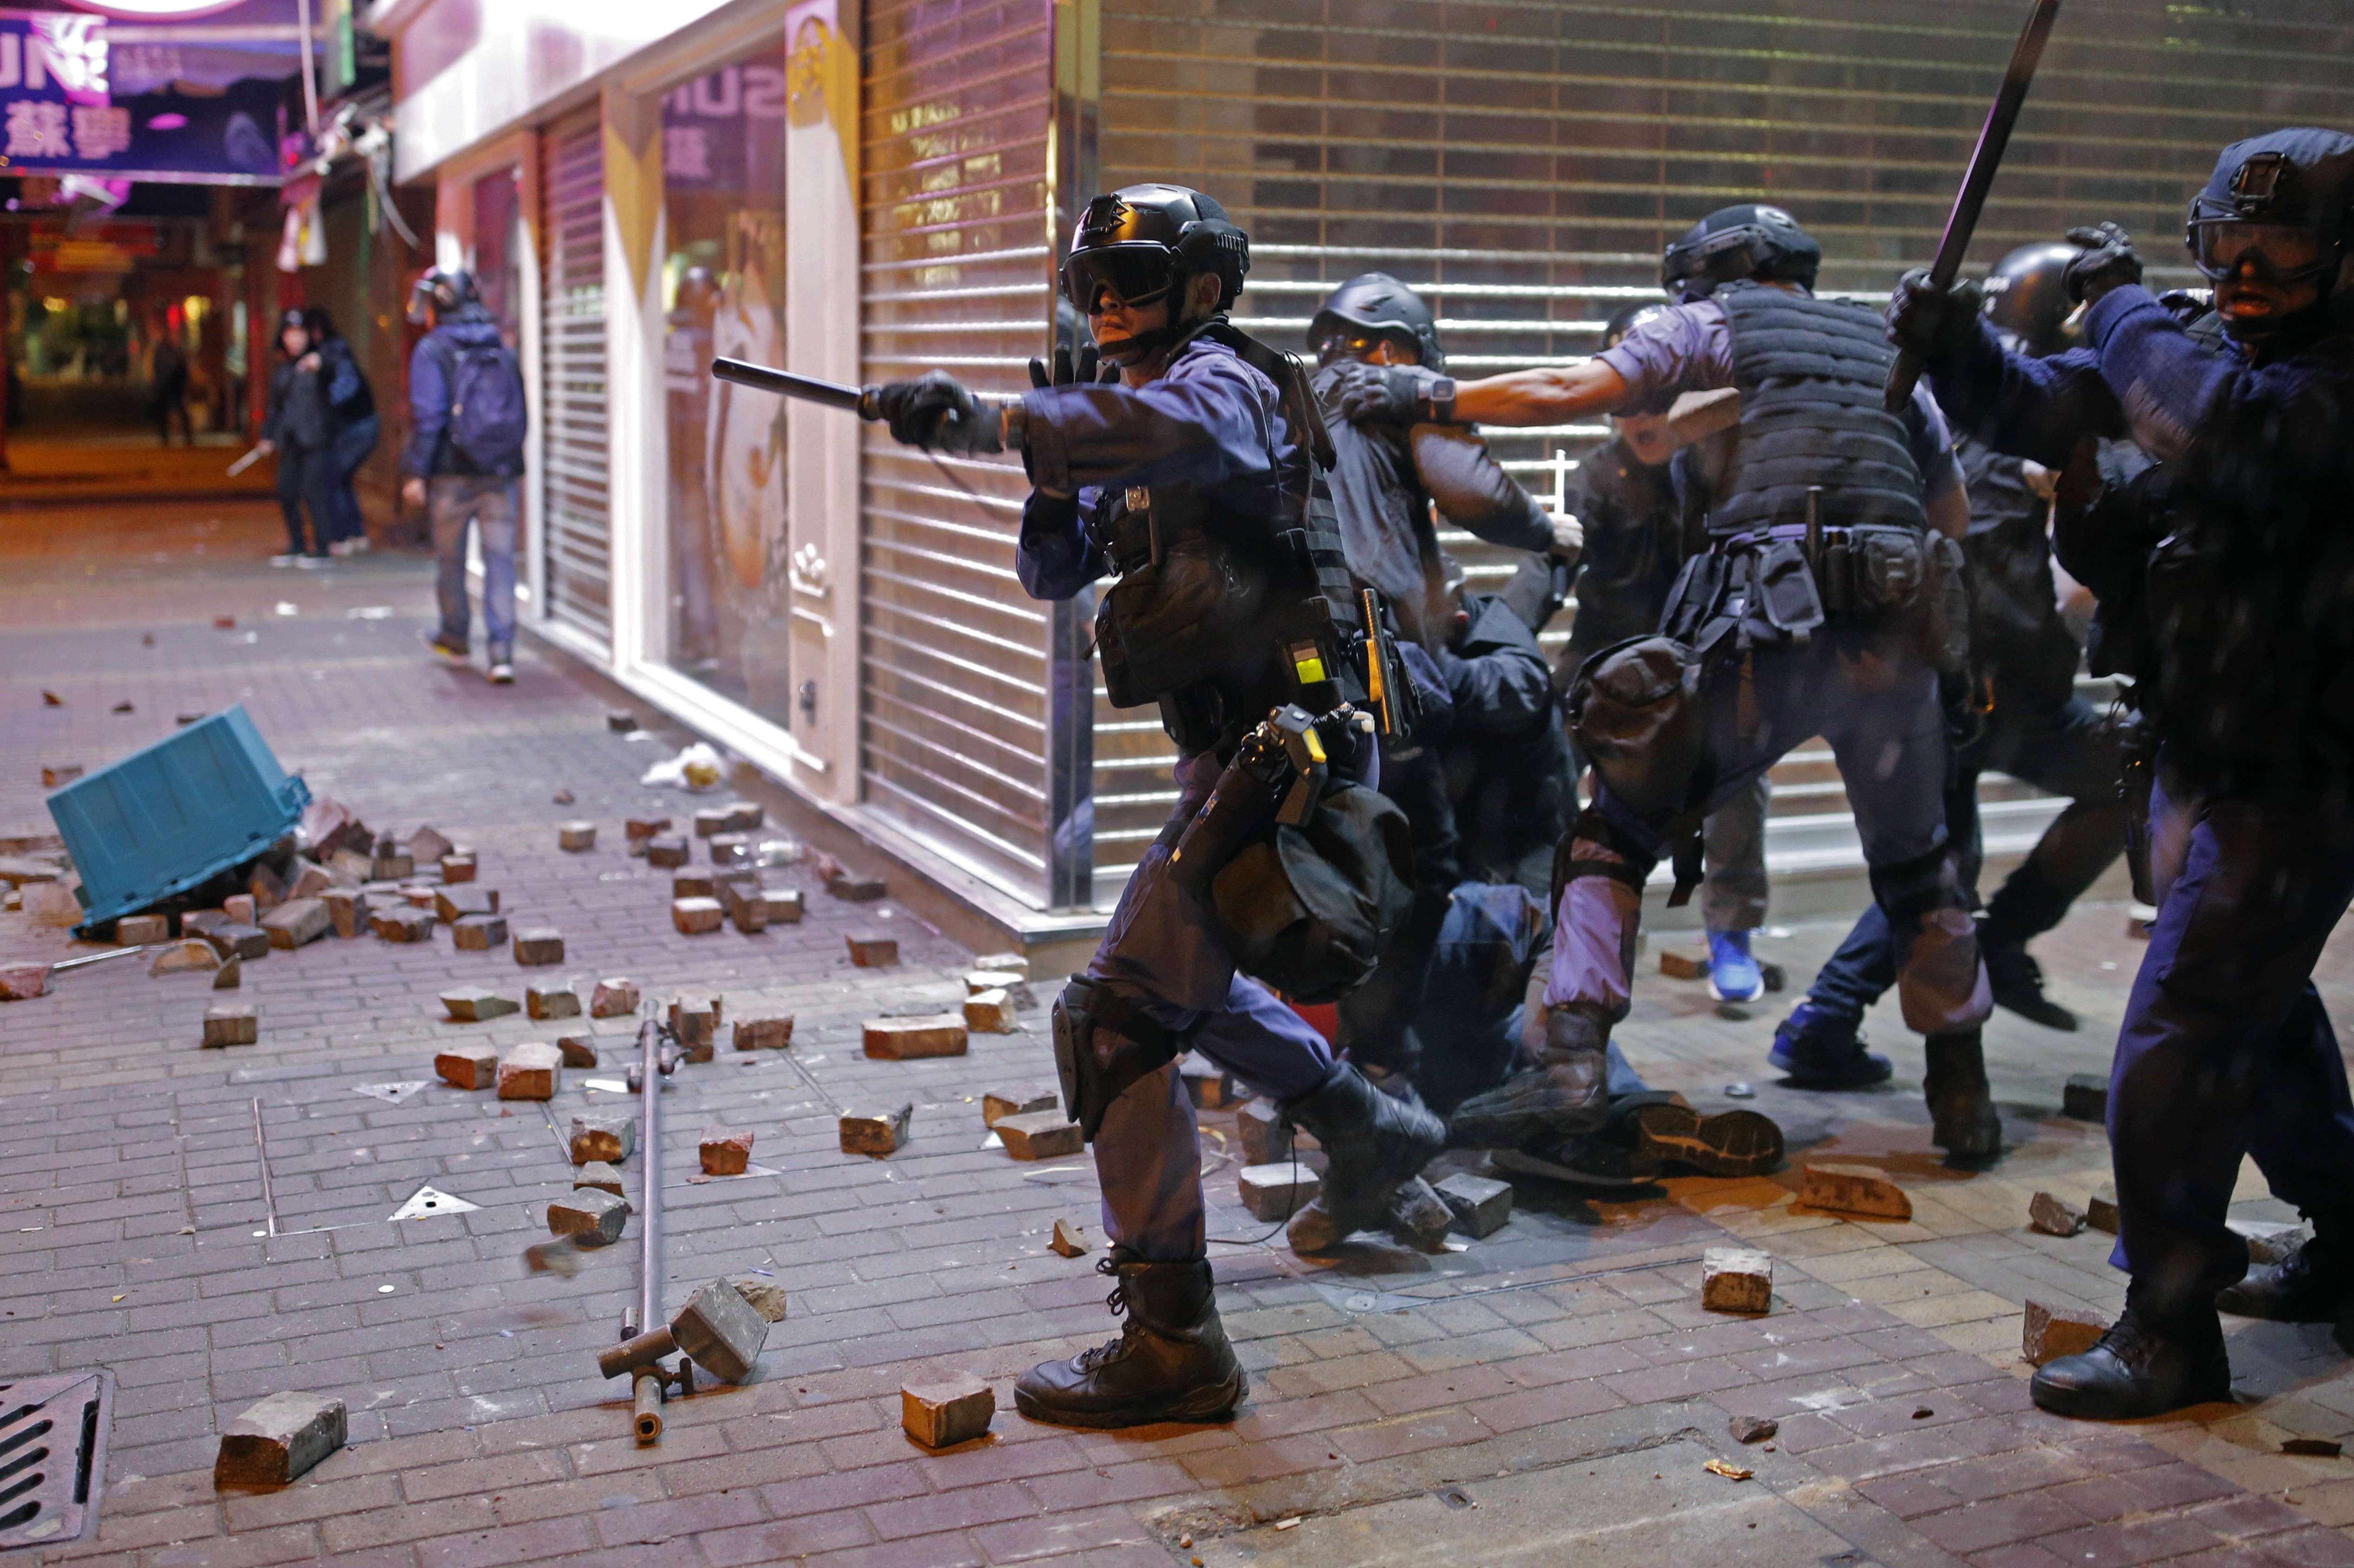 Rioting broke out in Mong Kok in 2016 following a hawker control operation. Photo: AP